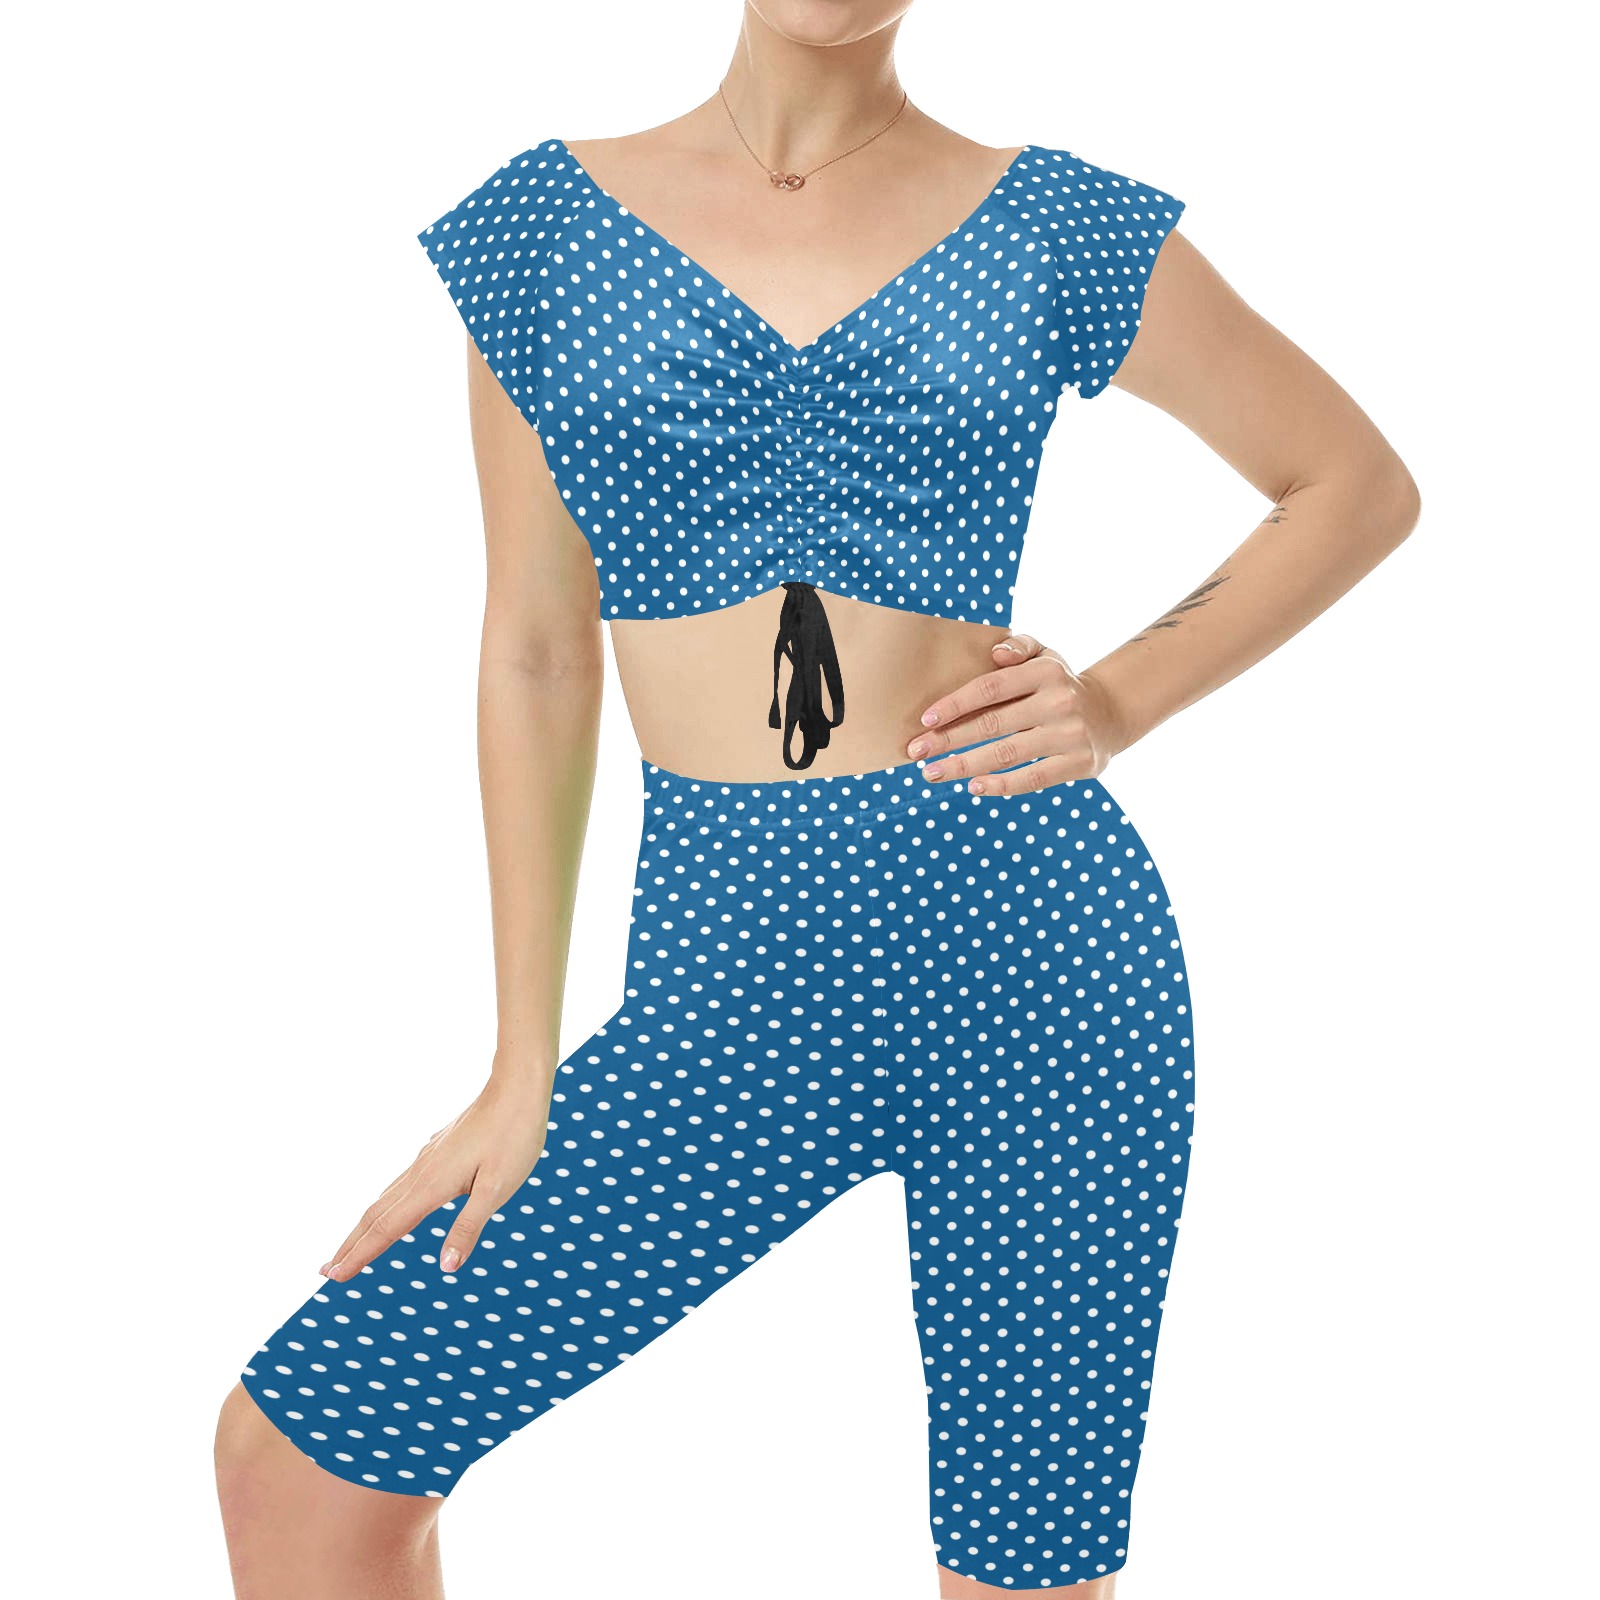 Classic Blue and White Polka Dots Women's Crop Top Yoga Set